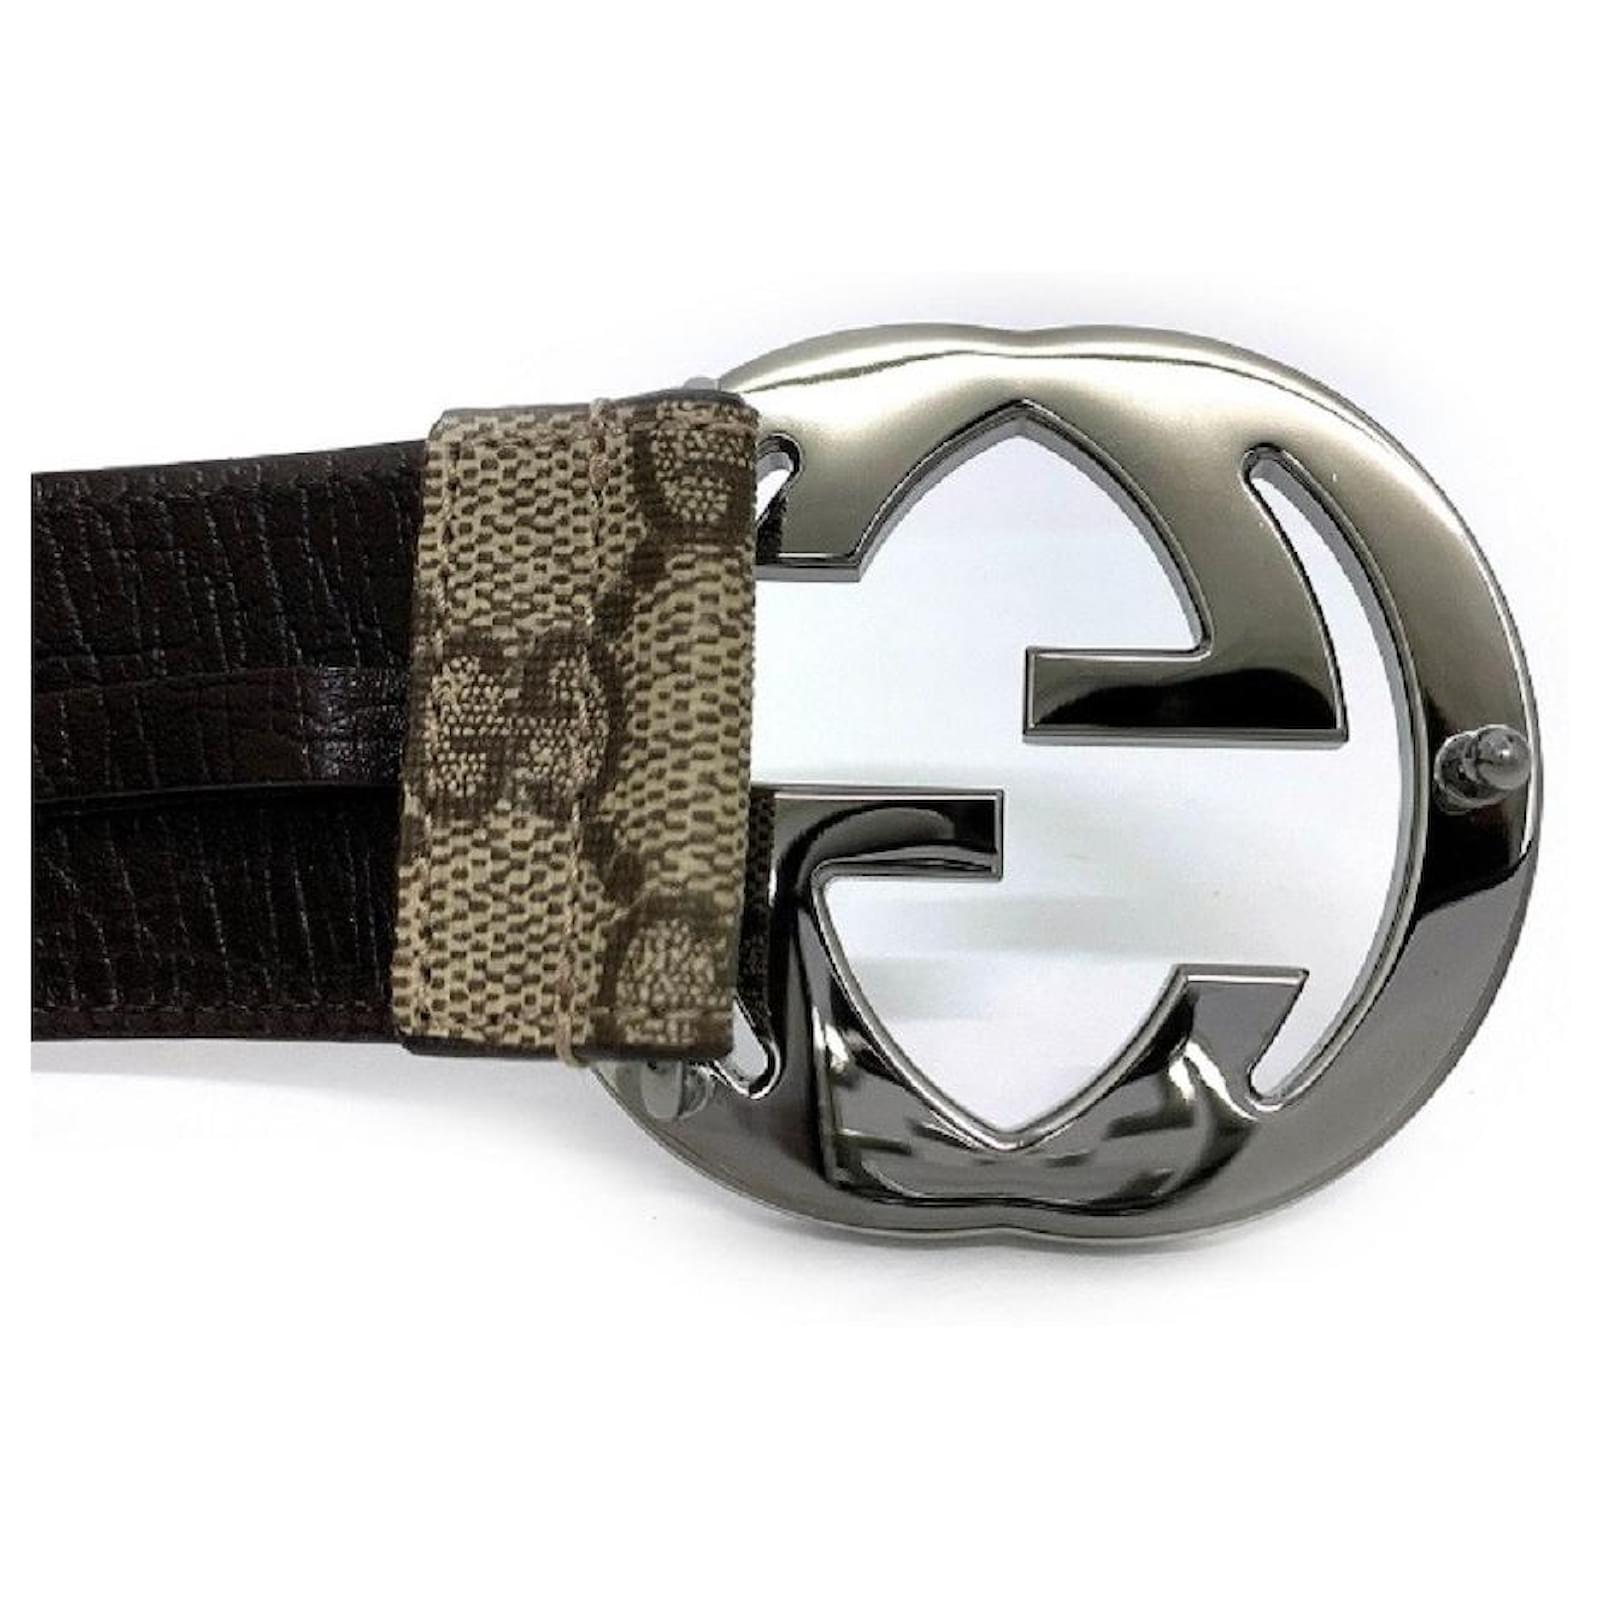 Gucci Belt with a decorative buckle, Women's Accessories